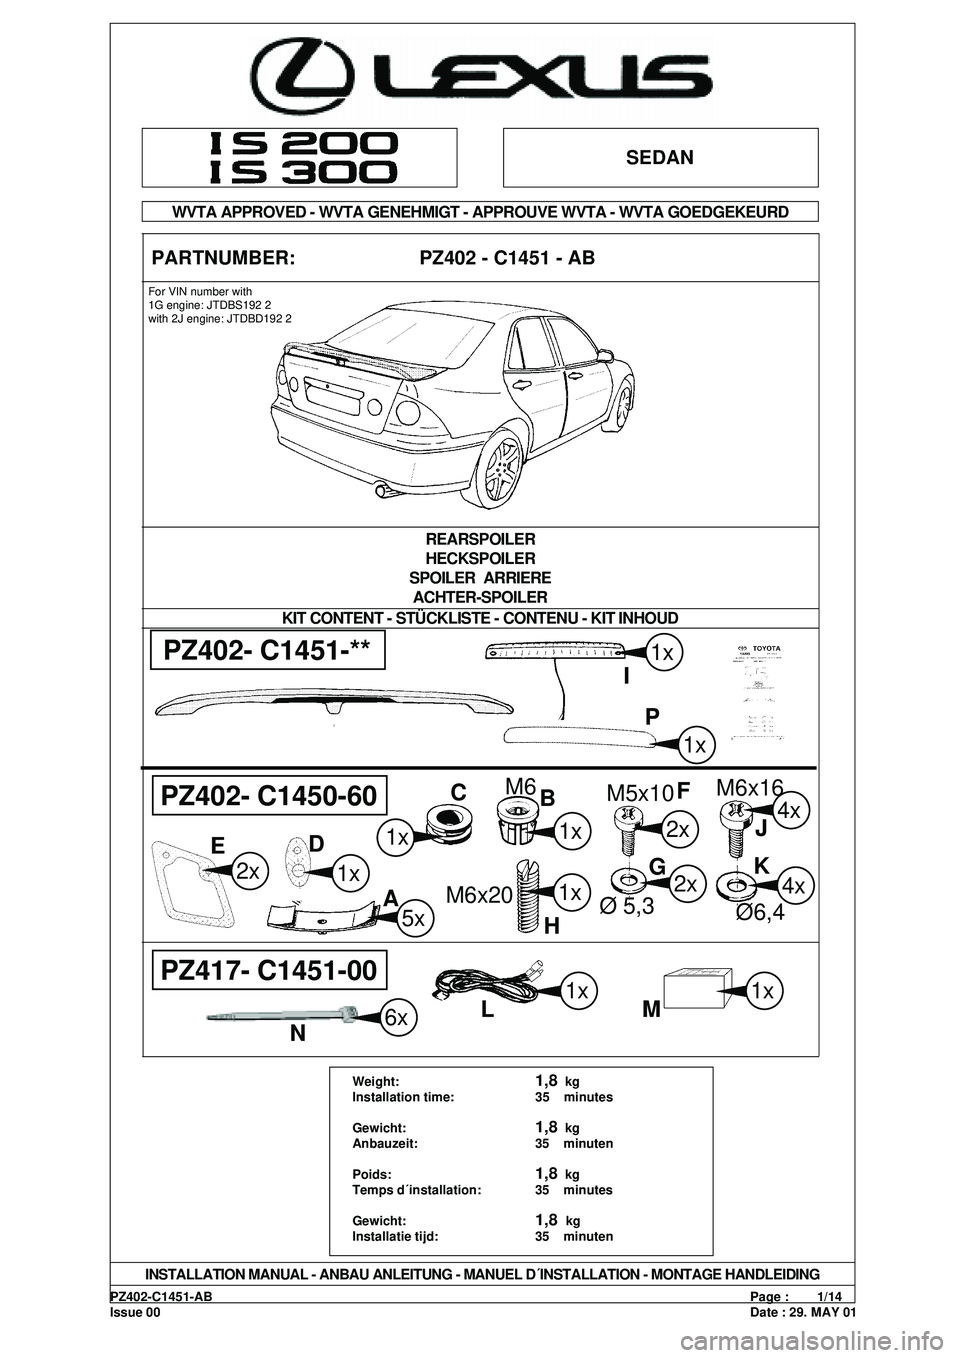 Lexus IS200 2001  Owners Manuals PZ402-C1451-ABPage :        1/14
Issue 00Date : 29. MAY 01
SEDAN
WVTA APPROVED - WVTA GENEHMIGT - APPROUVE WVTA - WVTA GOEDGEKEURD
PARTNUMBER:                       PZ402 - C1451 - AB
KIT CONTENT - ST